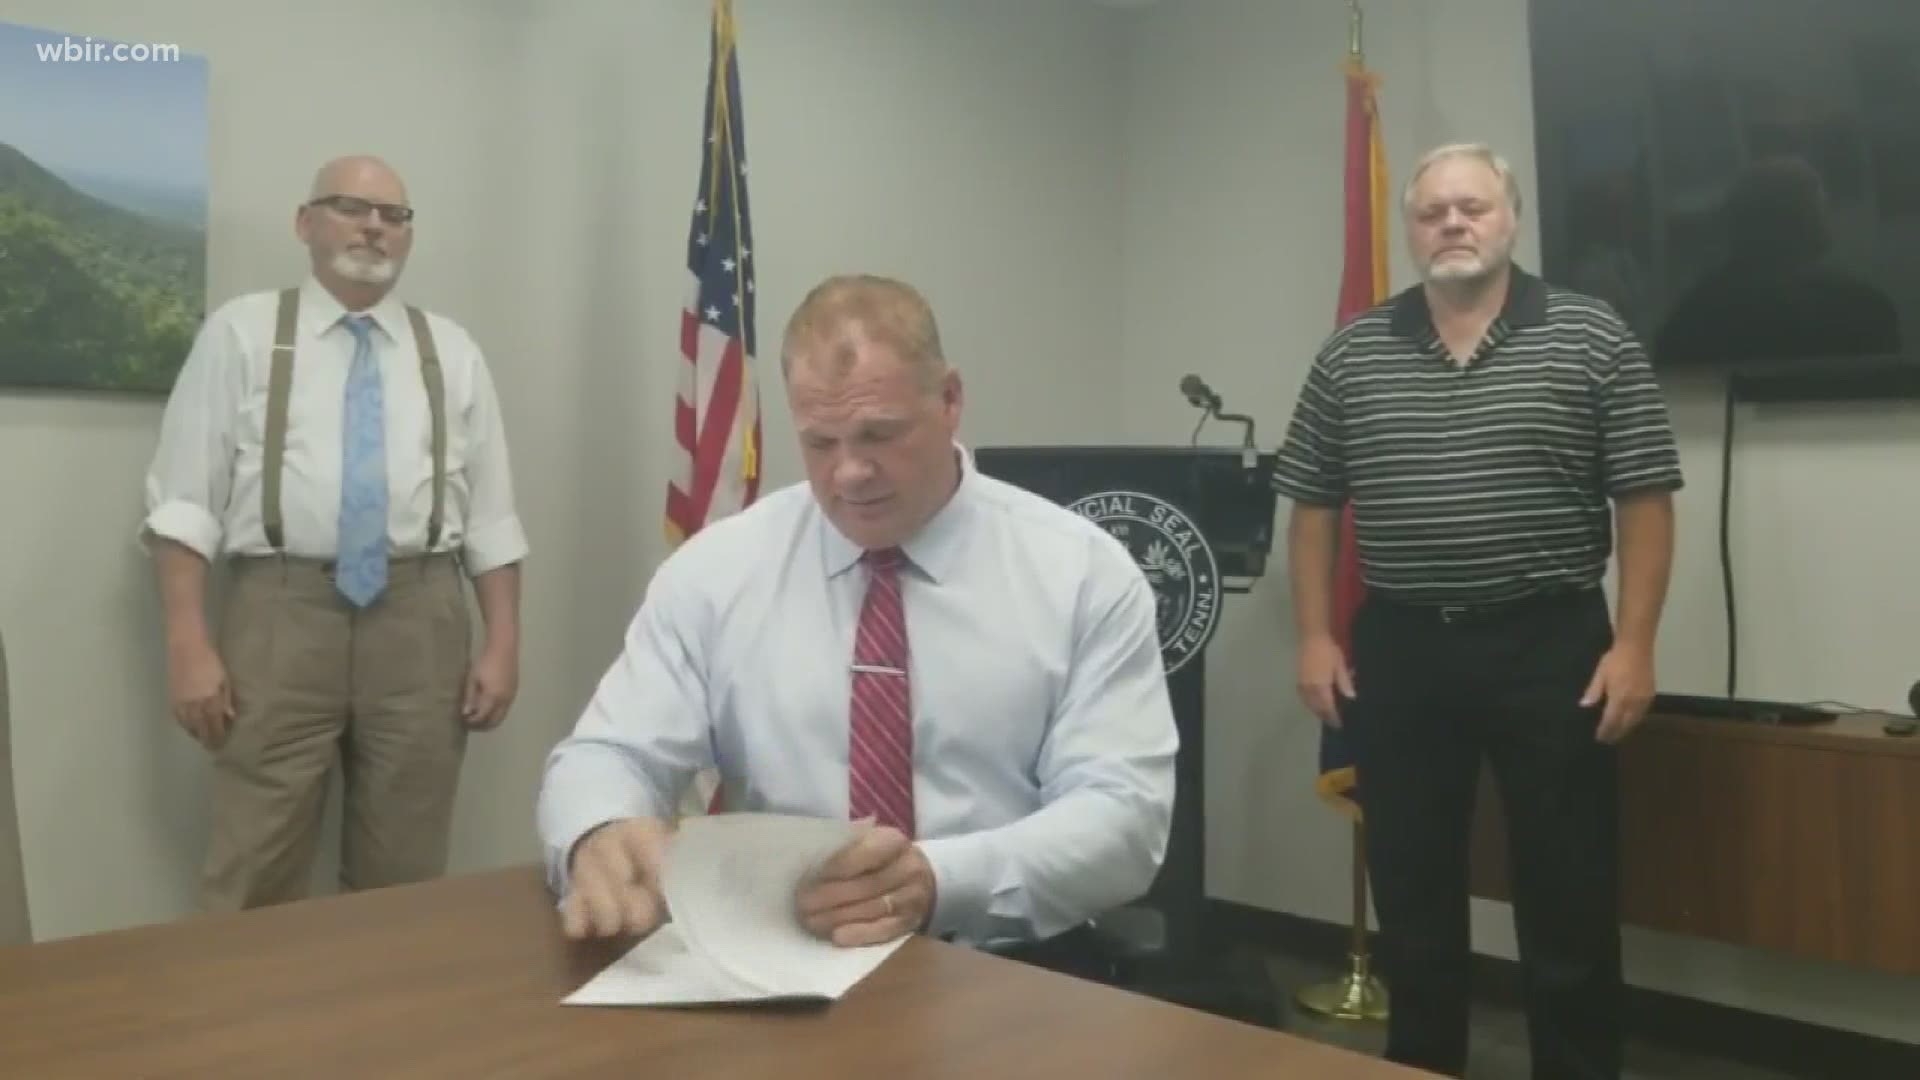 The Knox County Commission has approved and Mayor Jacobs has signed a symbolic resolution making the county a "Second Amendment" county.